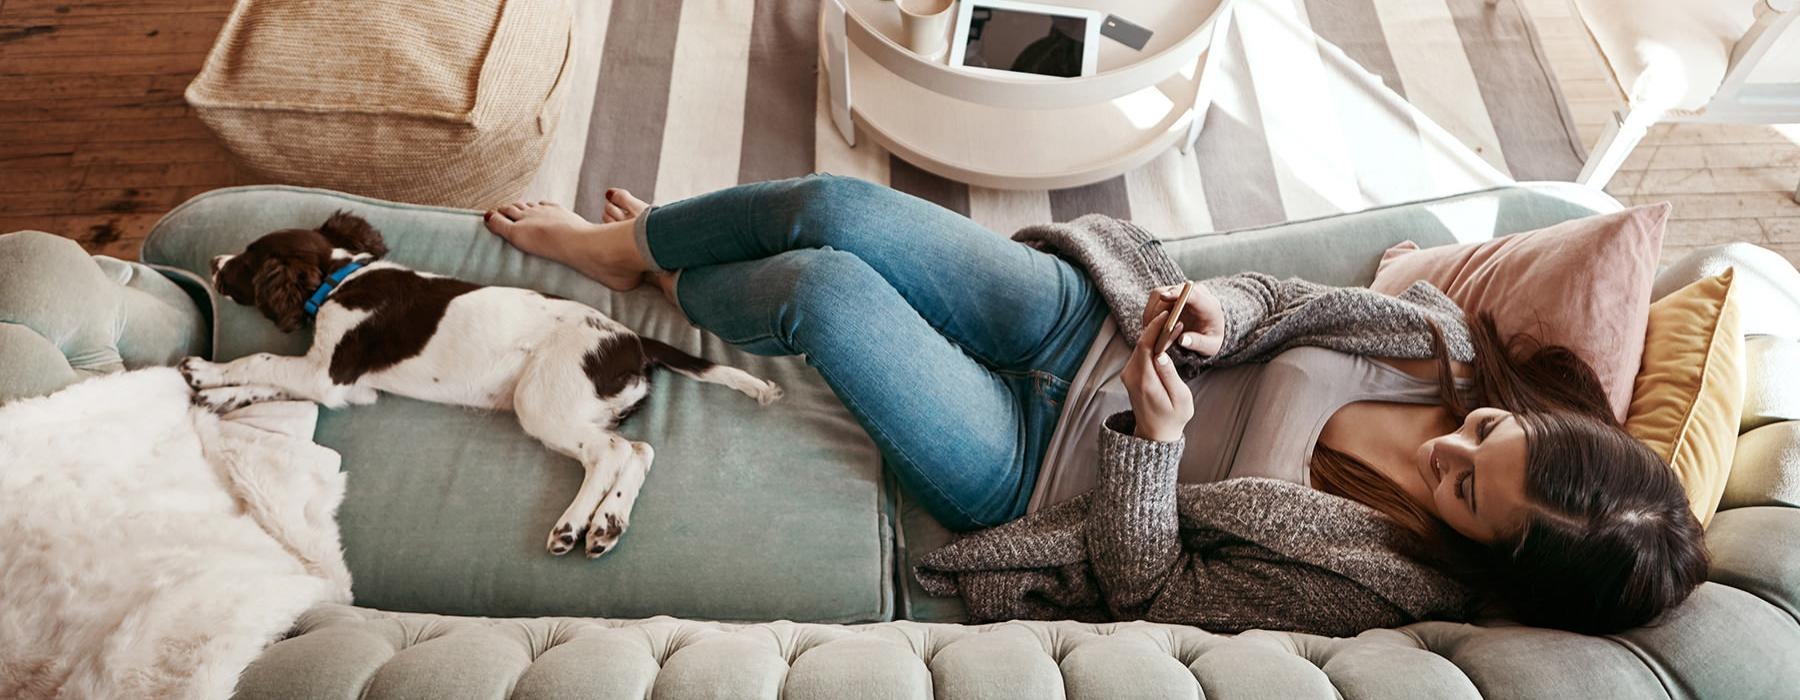 a person lying on a couch with a dog